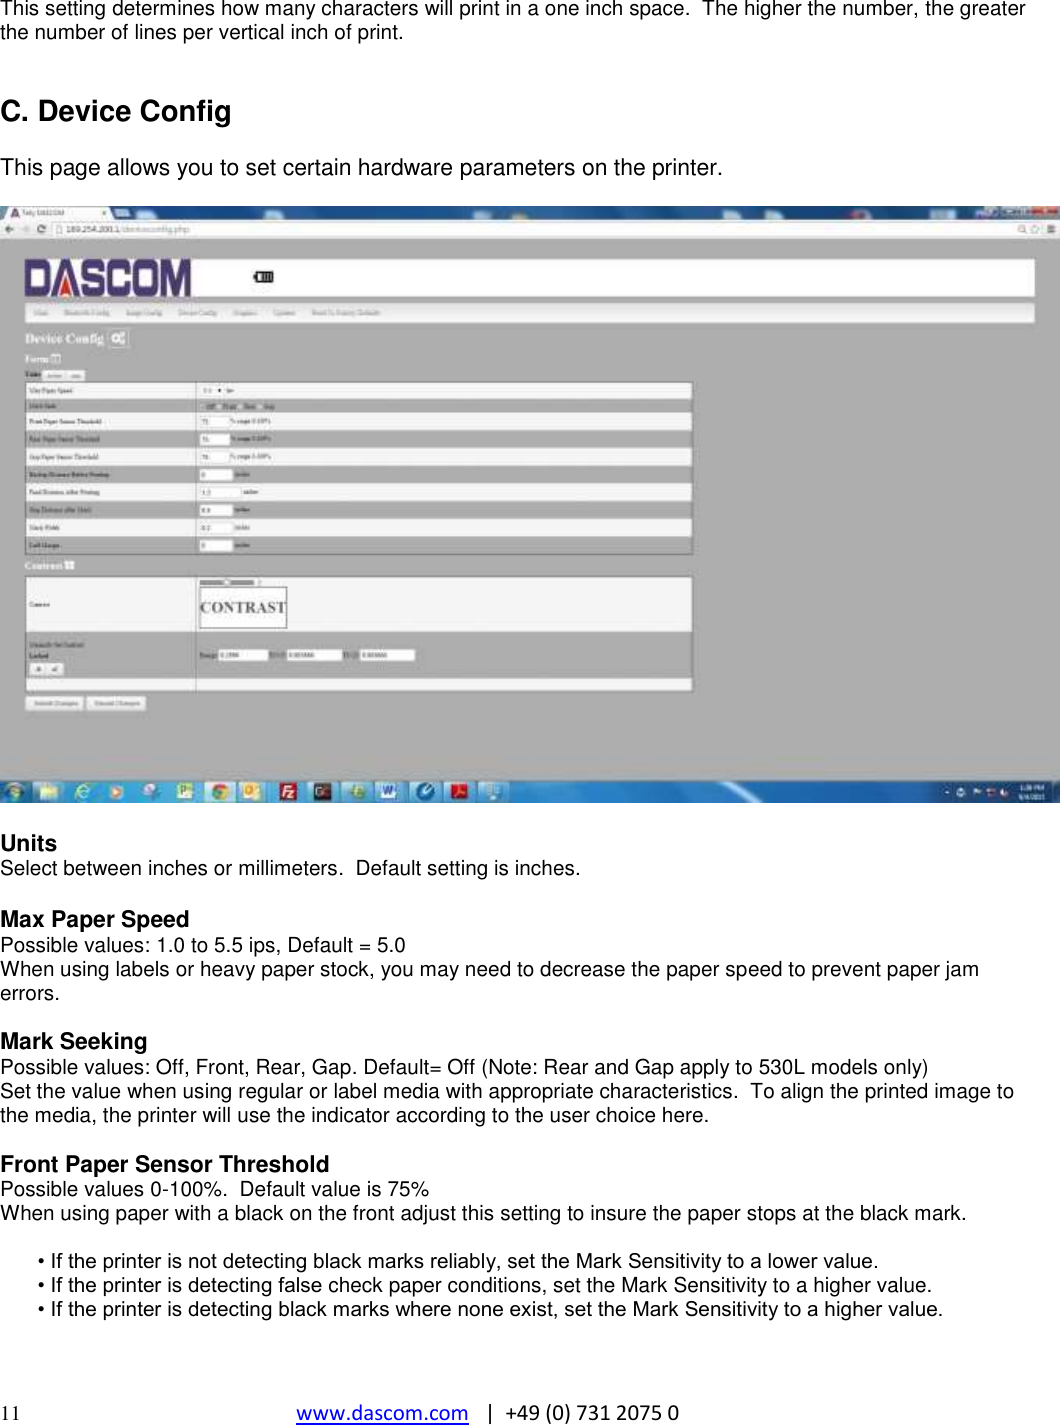  11 www.dascom.com   |  +49 (0) 731 2075 0  This setting determines how many characters will print in a one inch space.  The higher the number, the greater the number of lines per vertical inch of print.   C. Device Config  This page allows you to set certain hardware parameters on the printer.    Units Select between inches or millimeters.  Default setting is inches.  Max Paper Speed Possible values: 1.0 to 5.5 ips, Default = 5.0 When using labels or heavy paper stock, you may need to decrease the paper speed to prevent paper jam errors.  Mark Seeking Possible values: Off, Front, Rear, Gap. Default= Off (Note: Rear and Gap apply to 530L models only) Set the value when using regular or label media with appropriate characteristics.  To align the printed image to the media, the printer will use the indicator according to the user choice here.  Front Paper Sensor Threshold Possible values 0-100%.  Default value is 75% When using paper with a black on the front adjust this setting to insure the paper stops at the black mark.  • If the printer is not detecting black marks reliably, set the Mark Sensitivity to a lower value.  • If the printer is detecting false check paper conditions, set the Mark Sensitivity to a higher value.  • If the printer is detecting black marks where none exist, set the Mark Sensitivity to a higher value.   